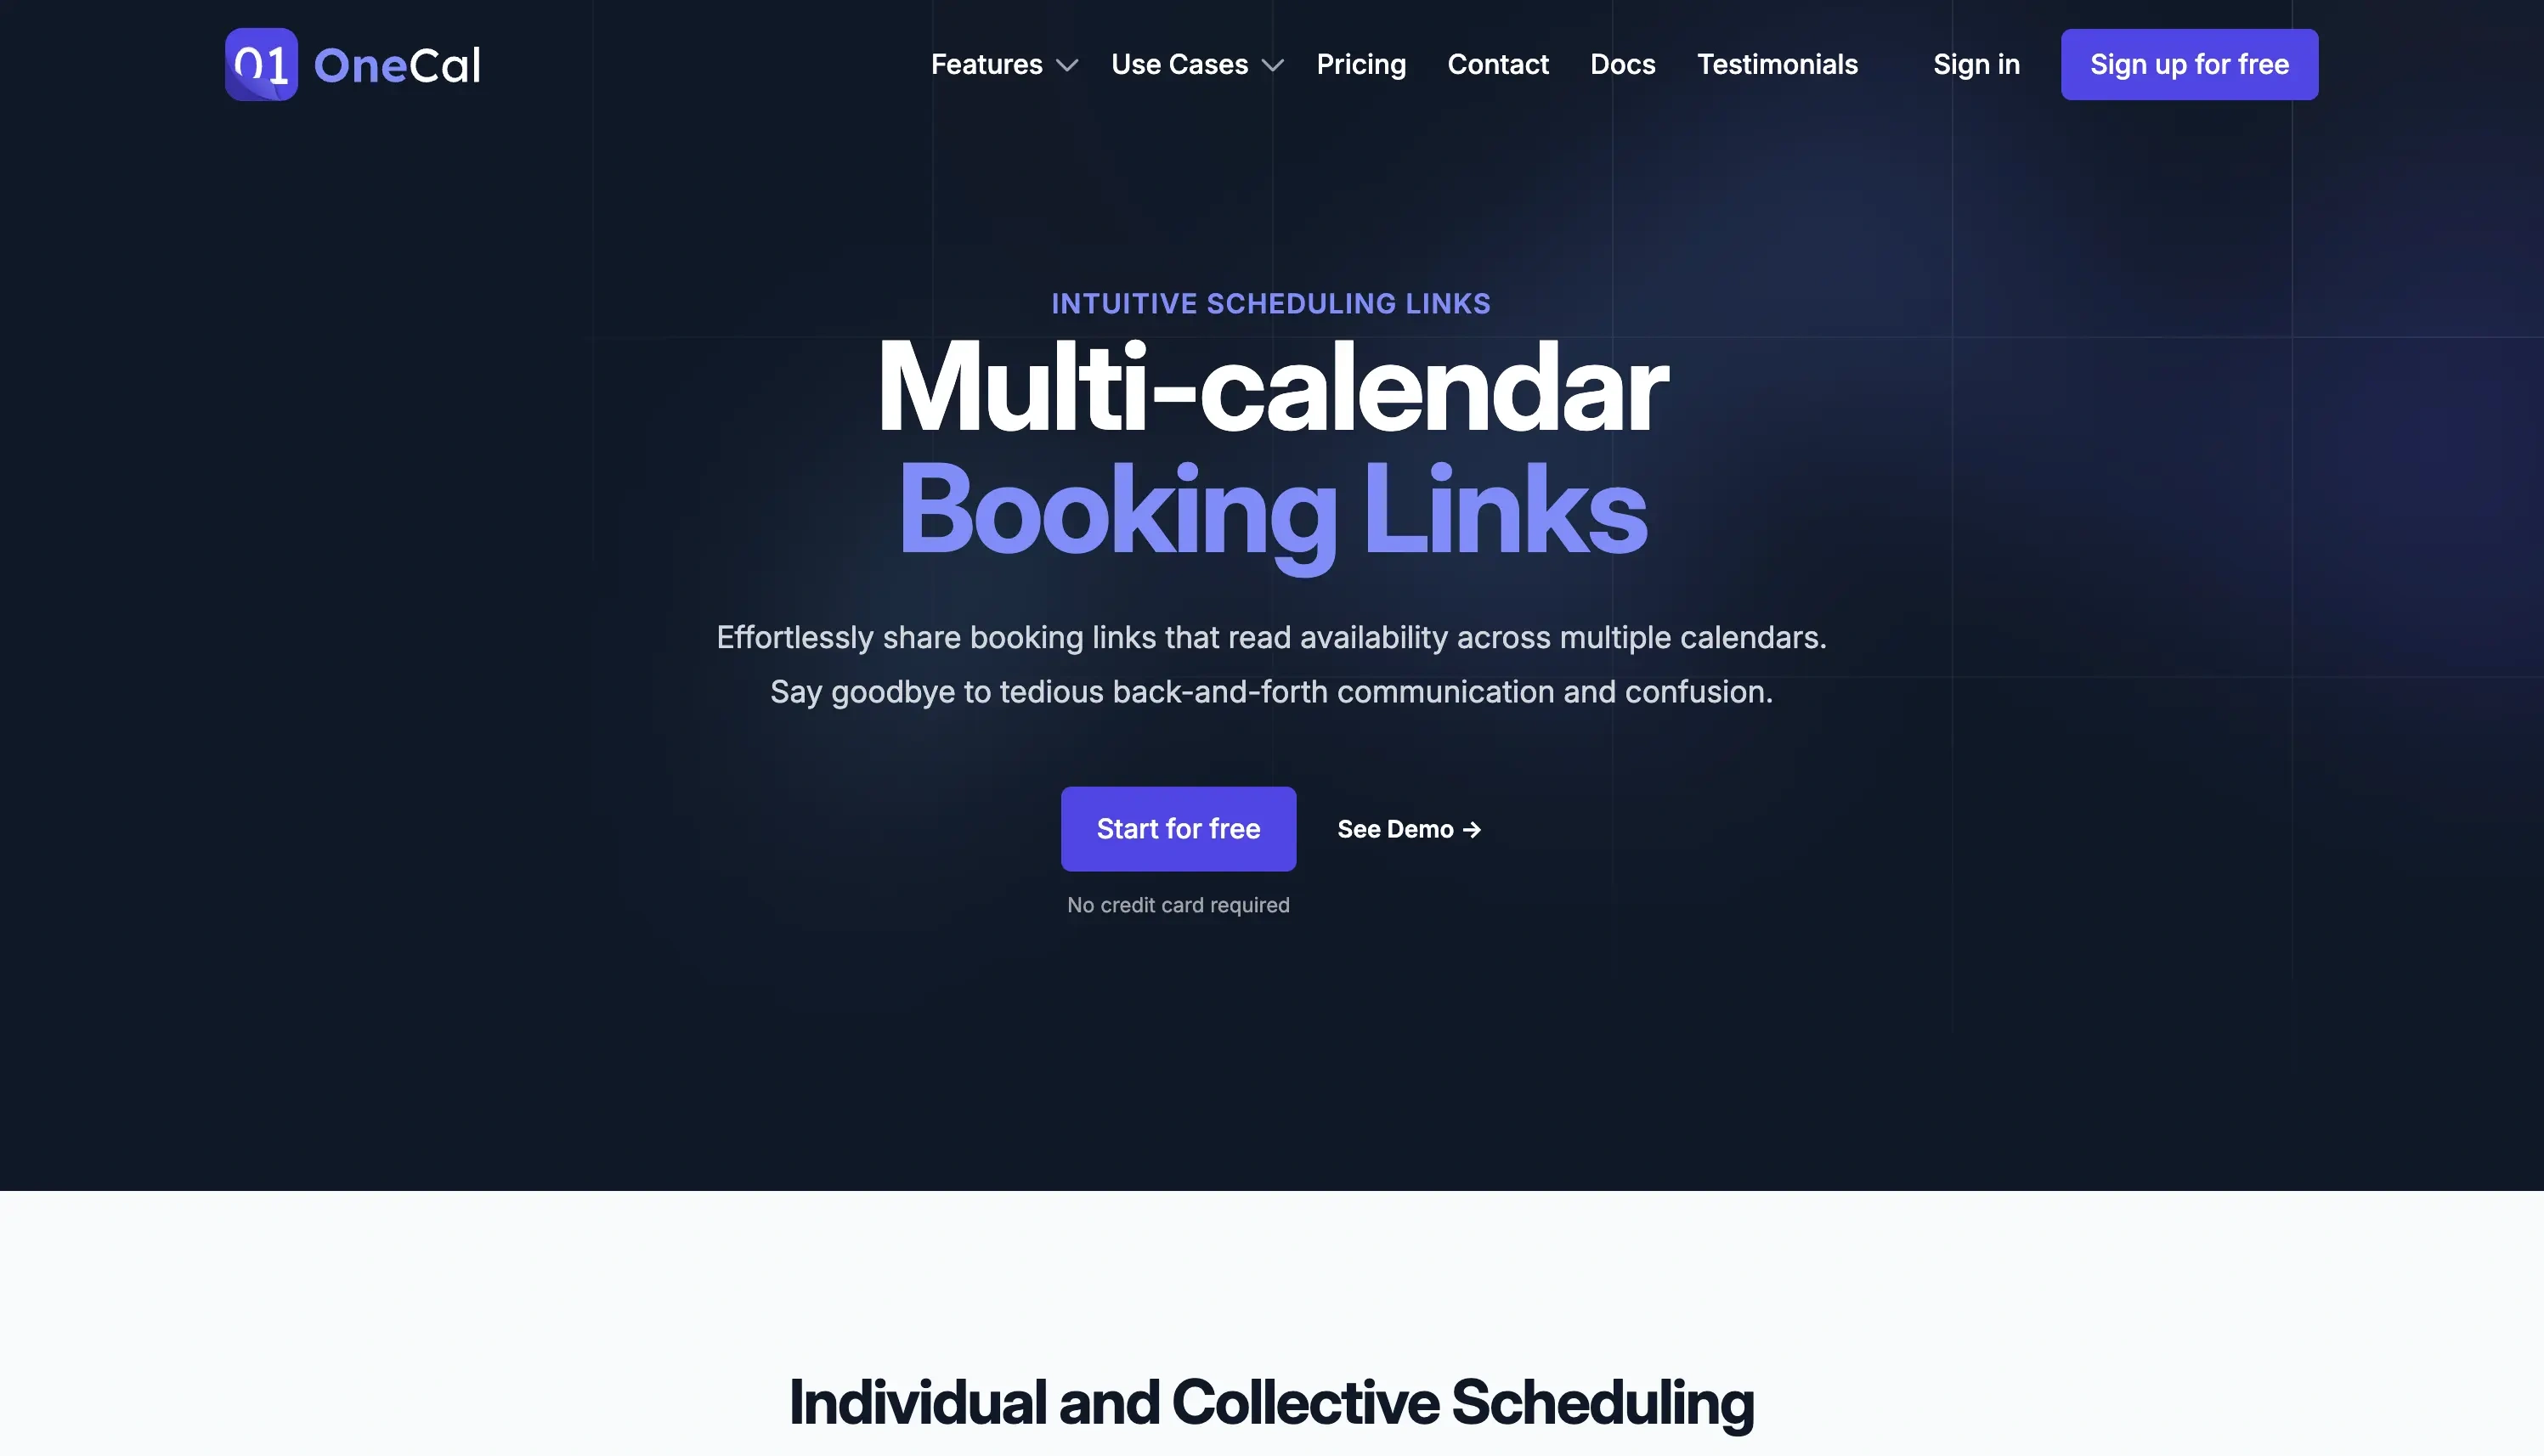 The landing page of OneCal Booking Links